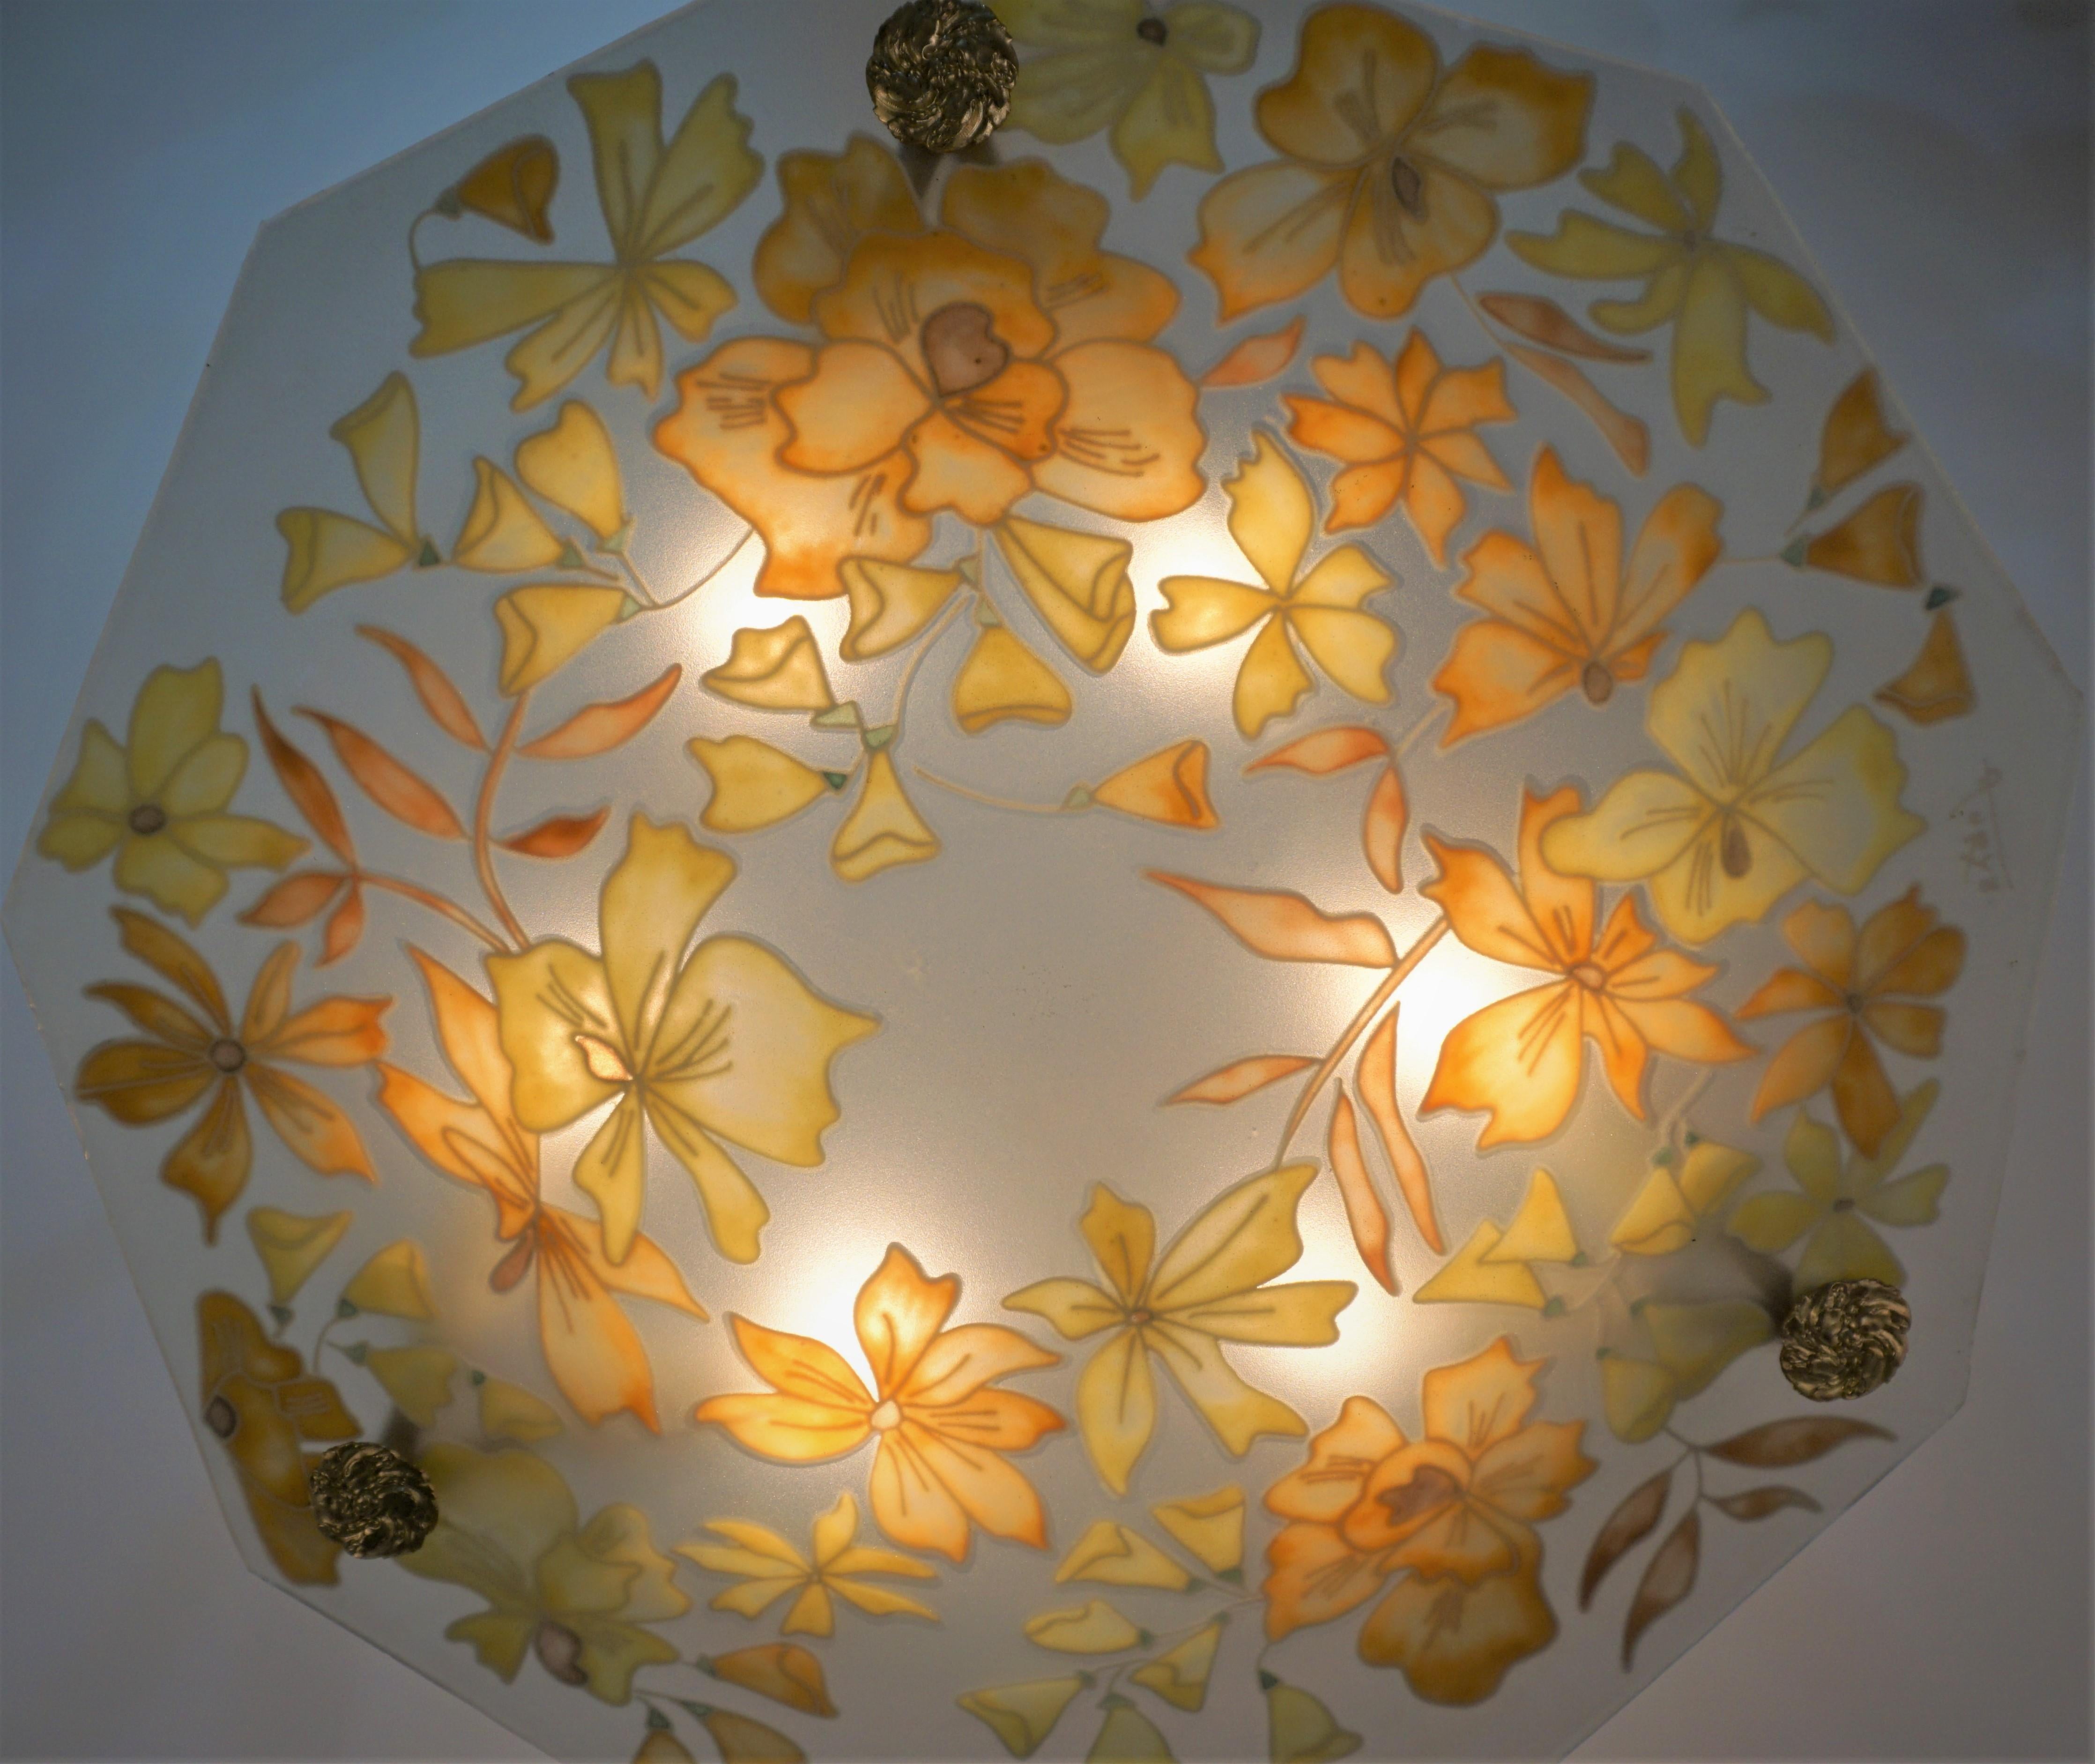 Clear frosted painted glass ceiling light chandelier features a floral design in yellow and orange with bronze chain and hardware, signed.
Professionally rewired and ready for installation.
Six lights, 60 watts max each.